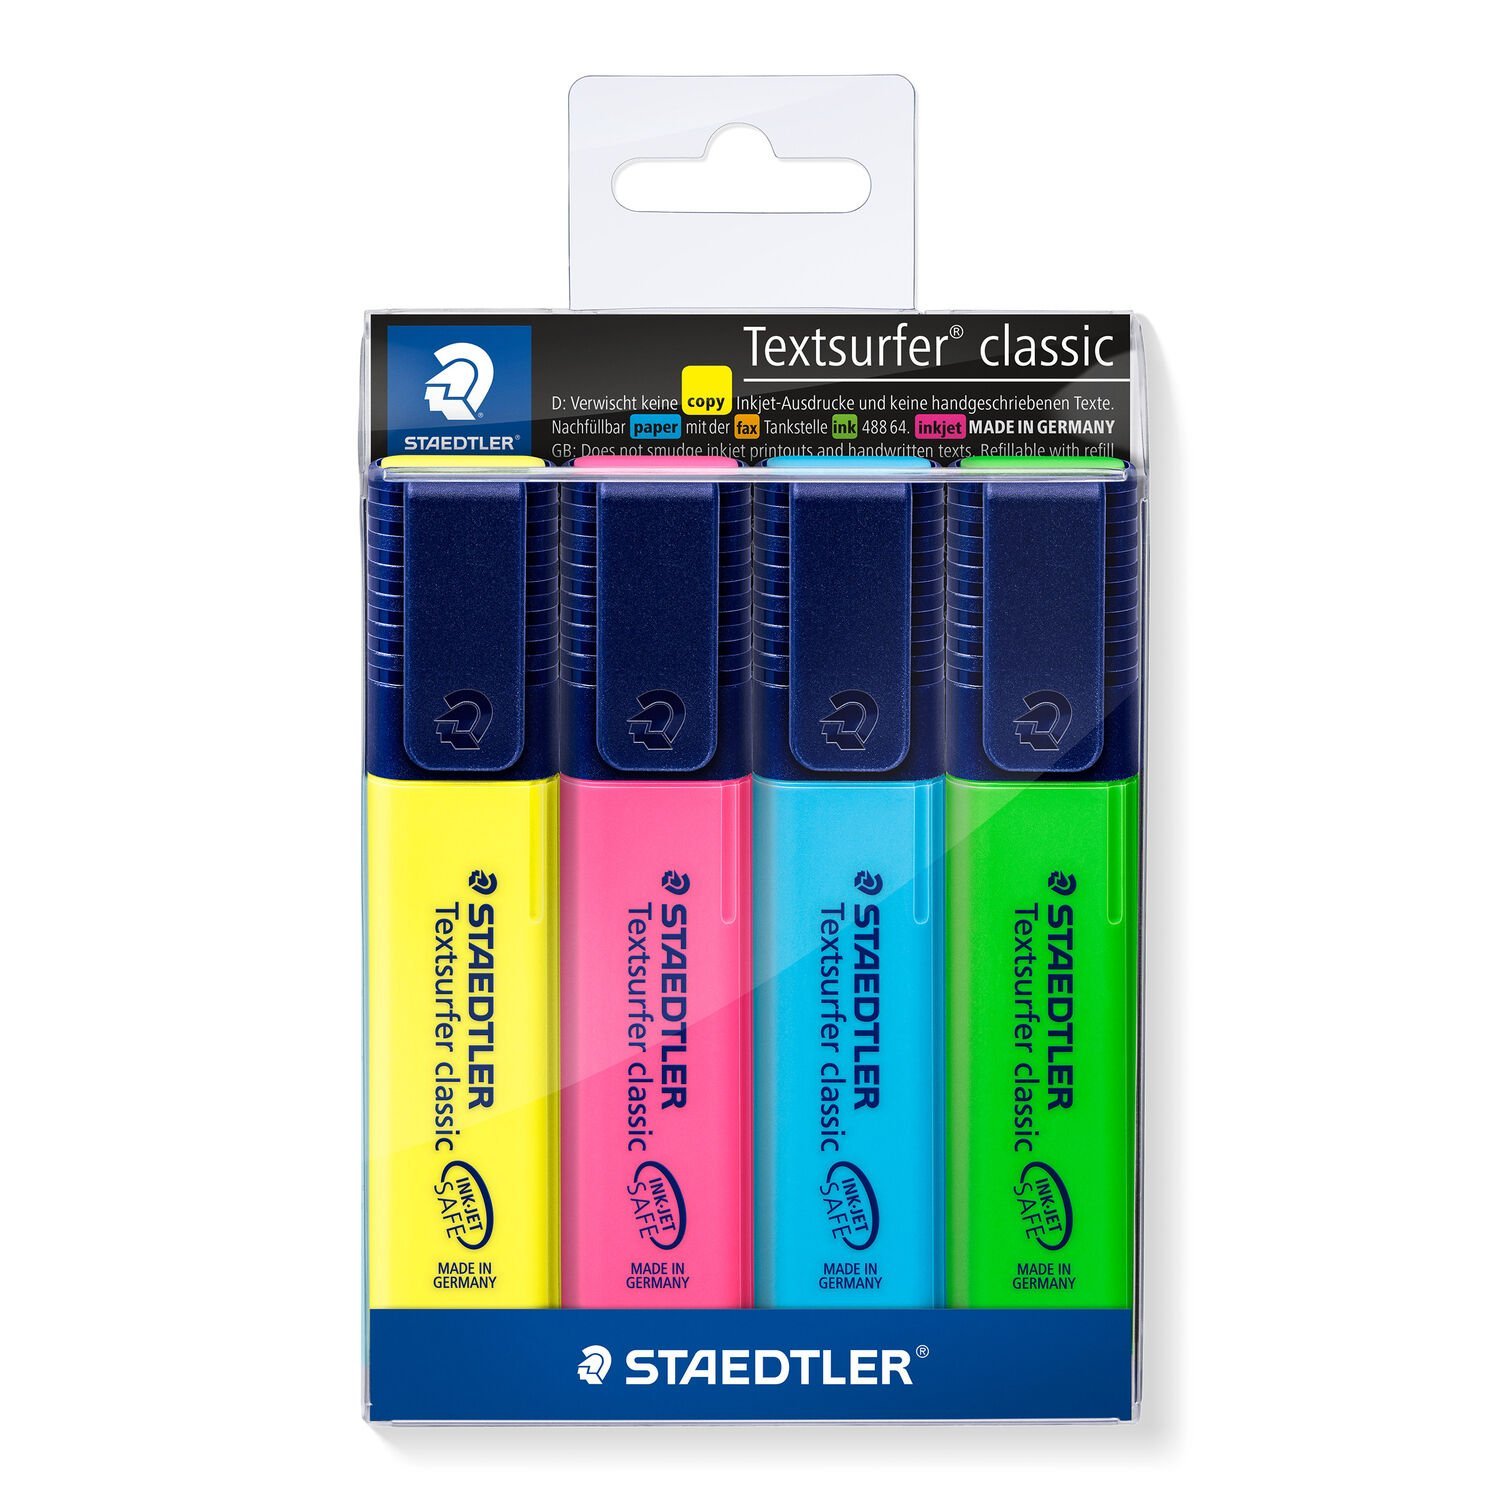 Wallet containing 4 Textsurfer classic in assorted colours